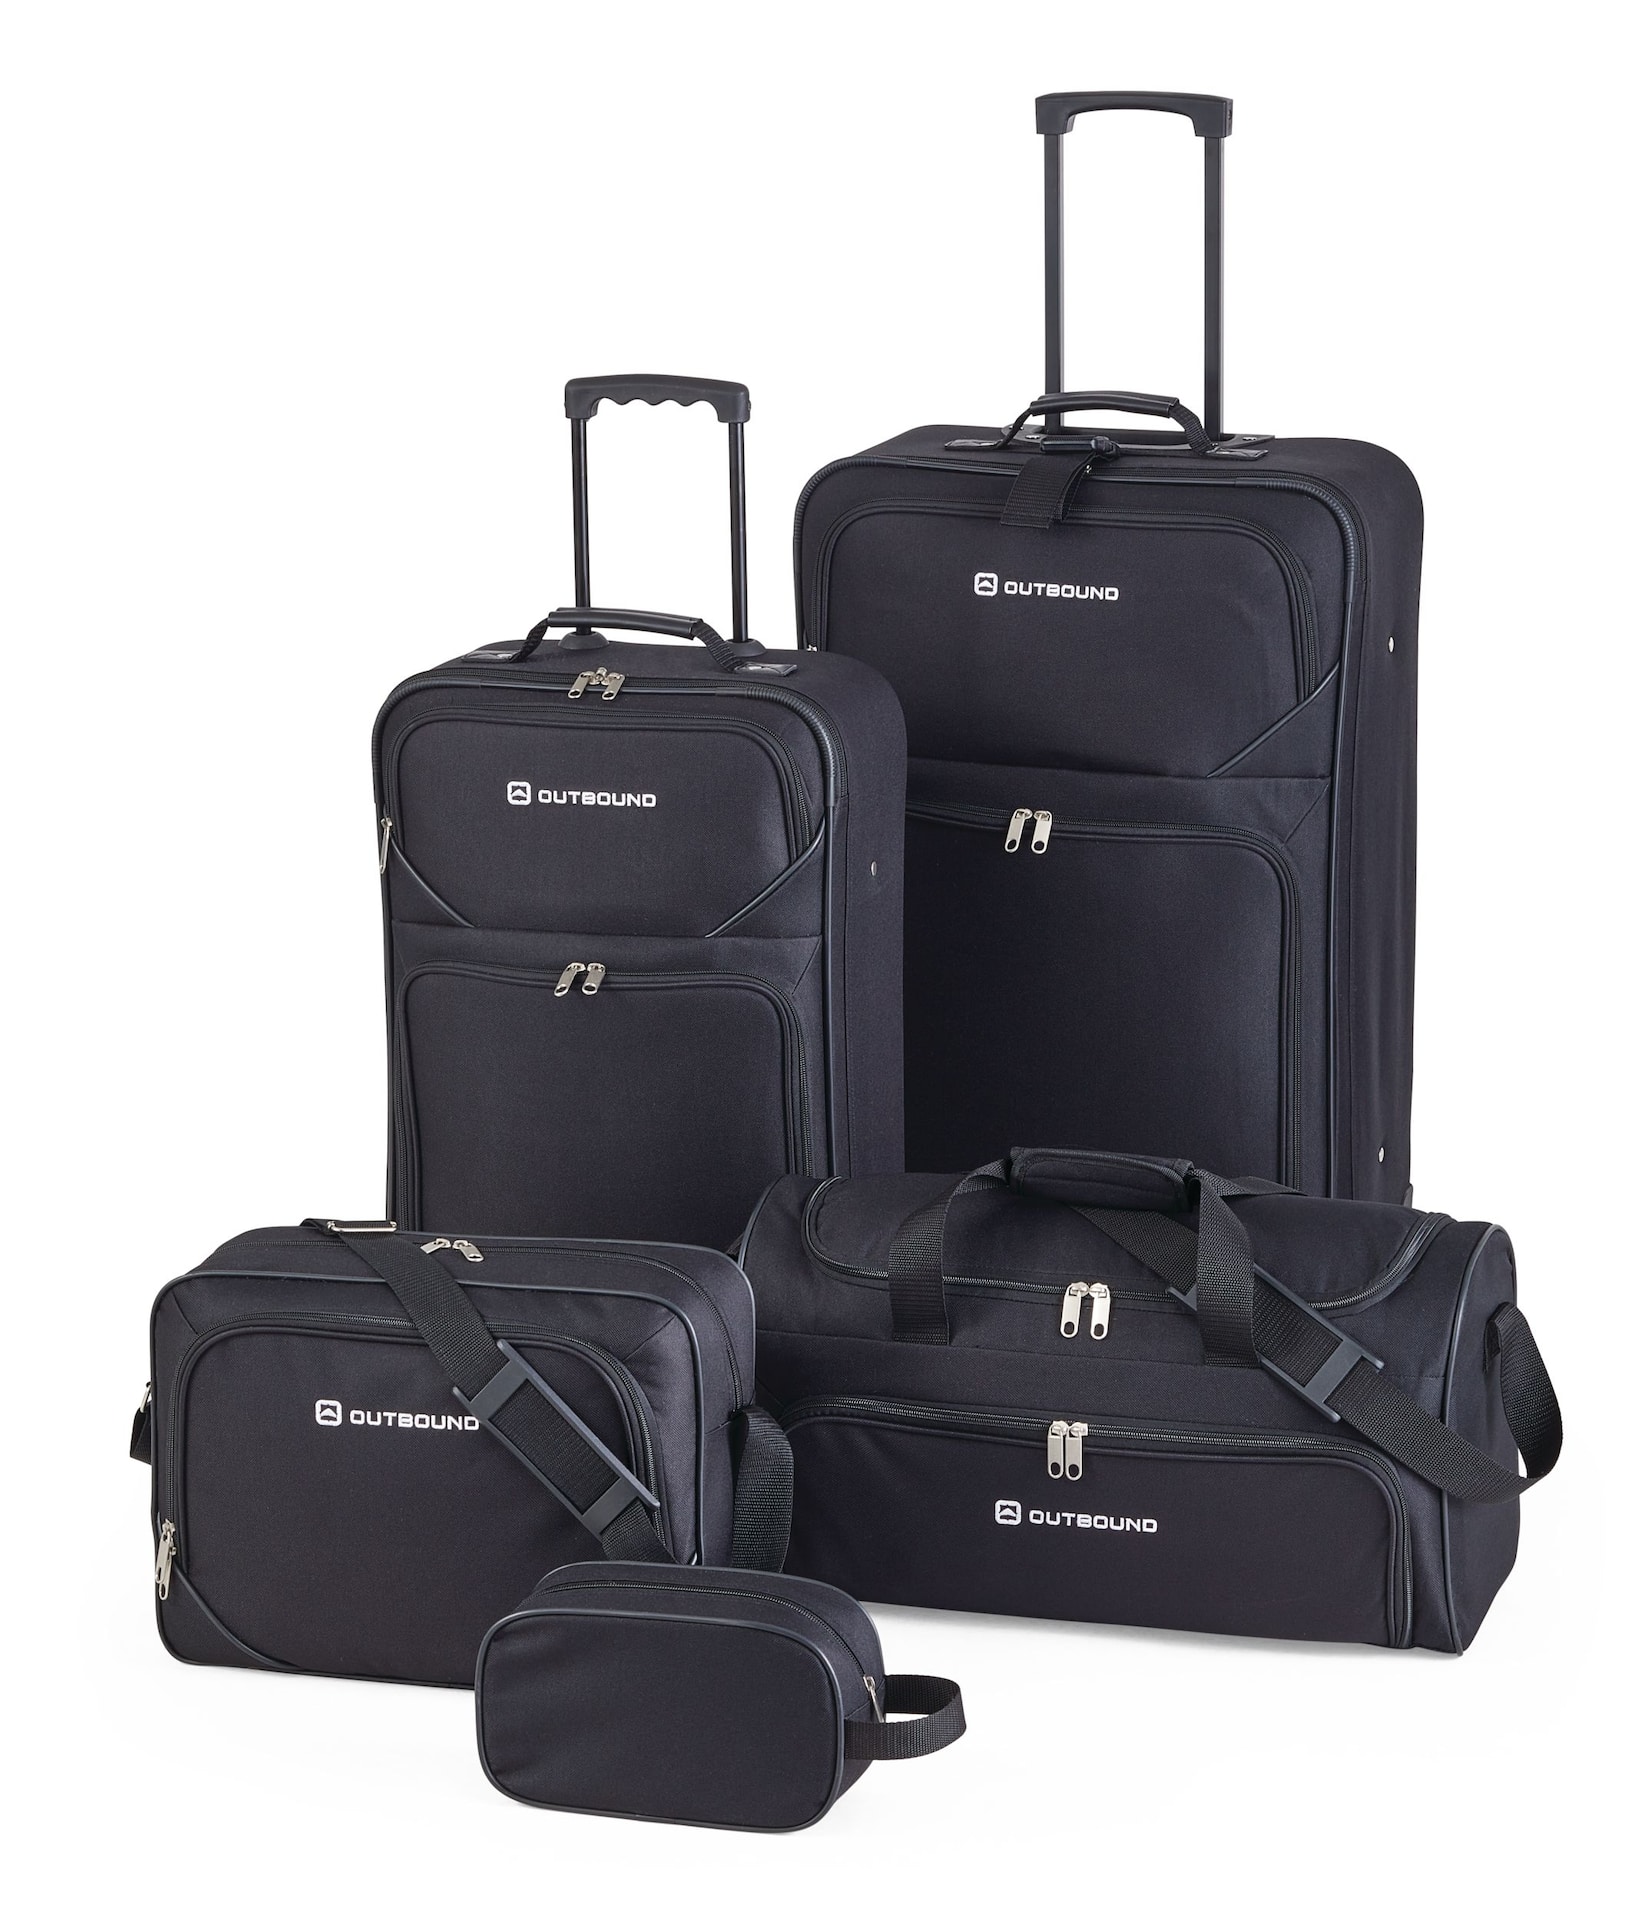 https://media-www.canadiantire.ca/product/playing/camping/backpacks-luggage-accessories/0762893/outbound-5-piece-luggage-set-d6303ae5-bbb2-41e5-8c63-c023a874d3bc-jpgrendition.jpg